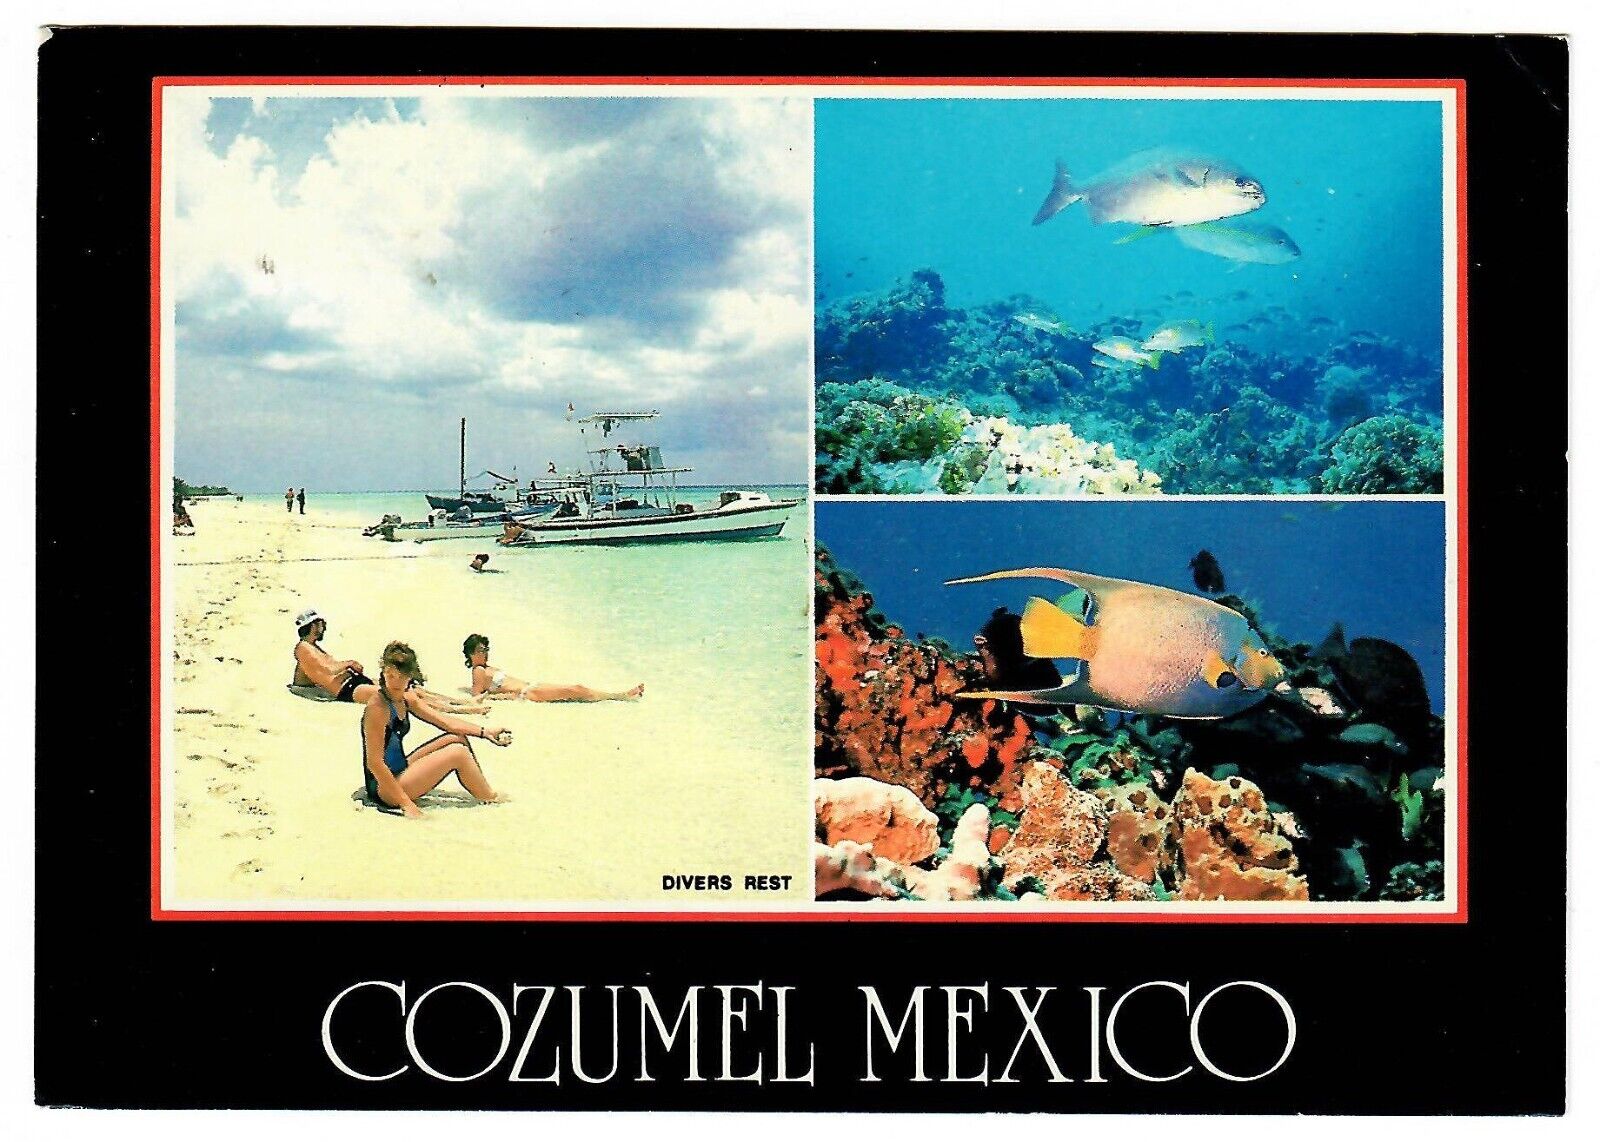 1987 Postcard Cozumel Mexico - Beach Divers Rest - Fish Travel Card Collection